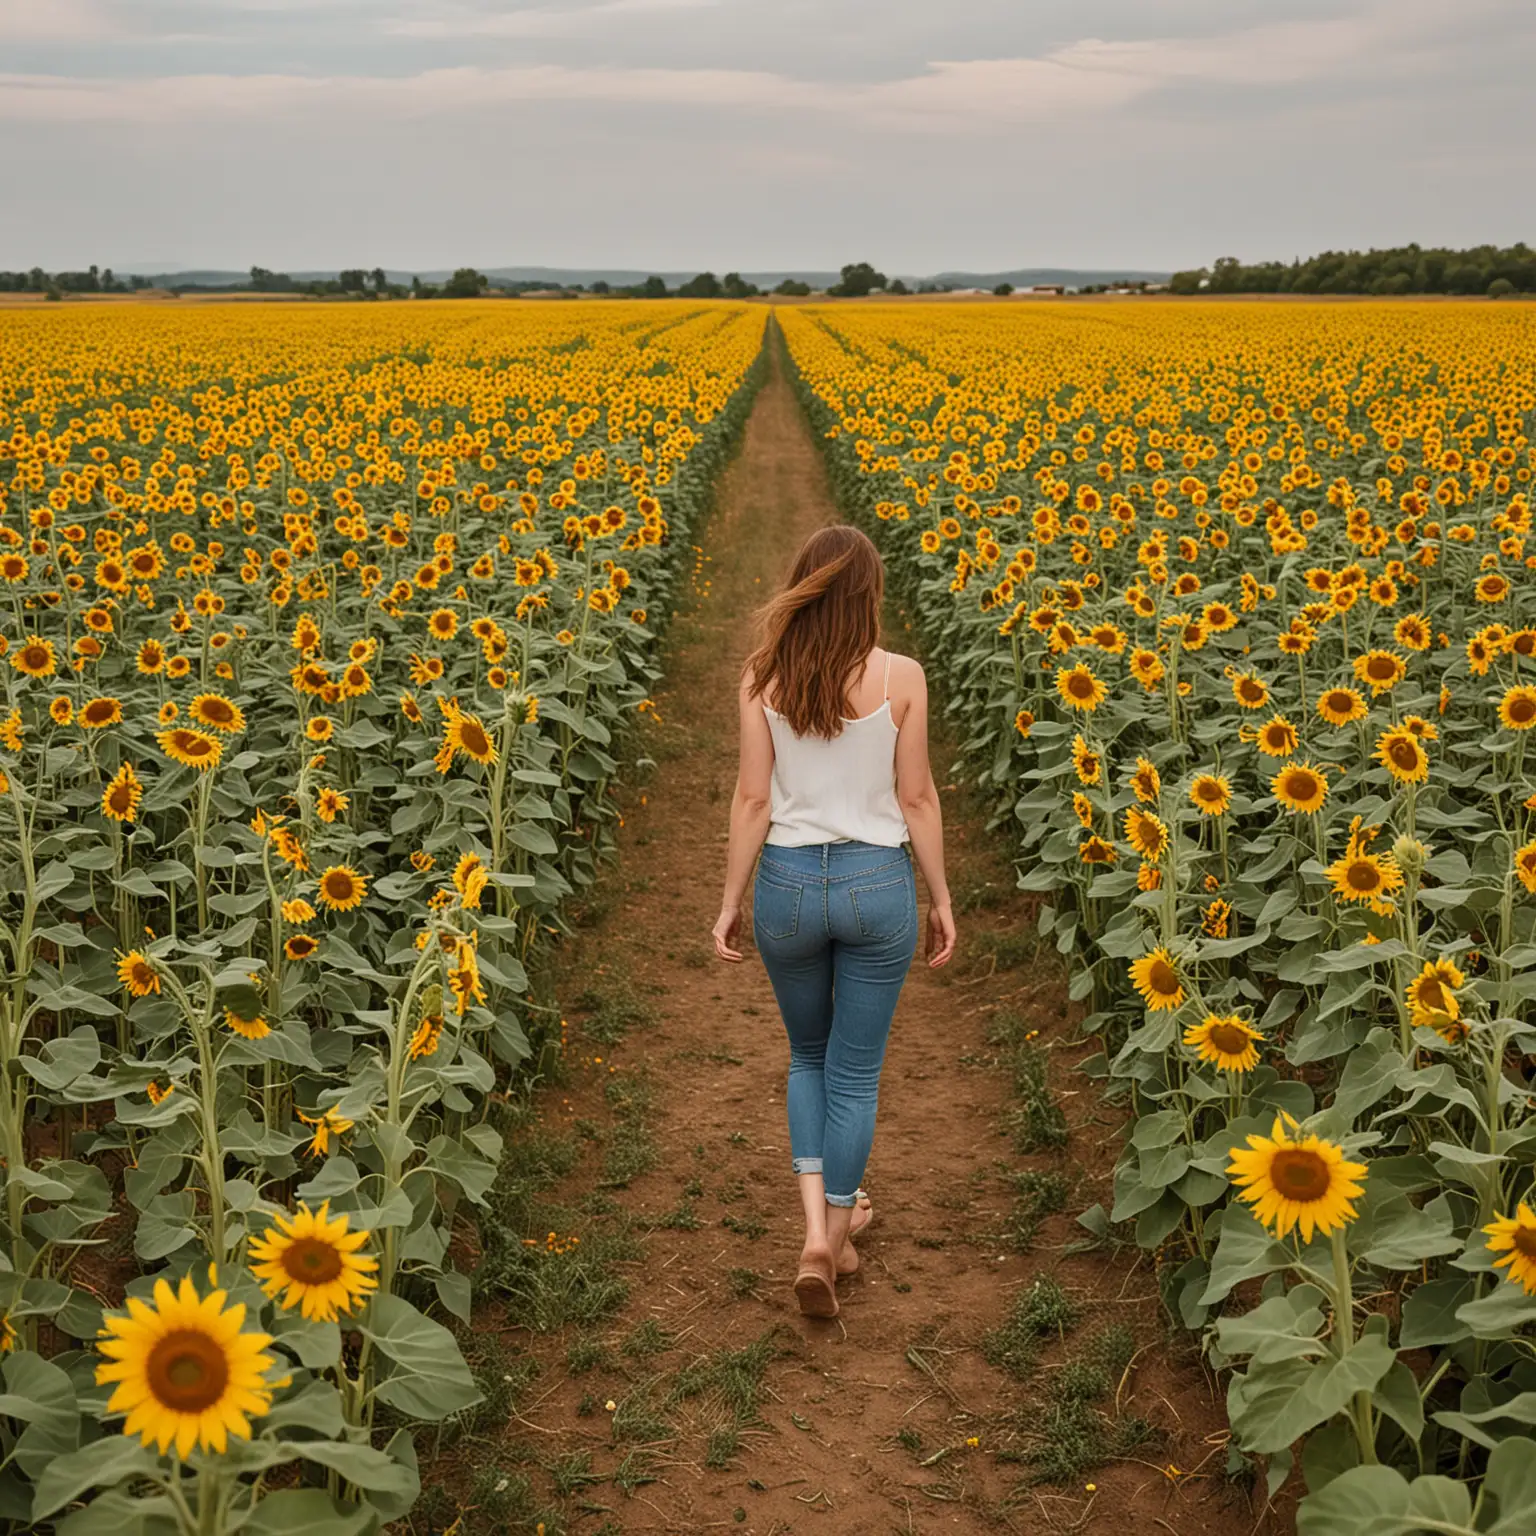 Woman Walking Through Field of Sunflowers on a Sunny Day